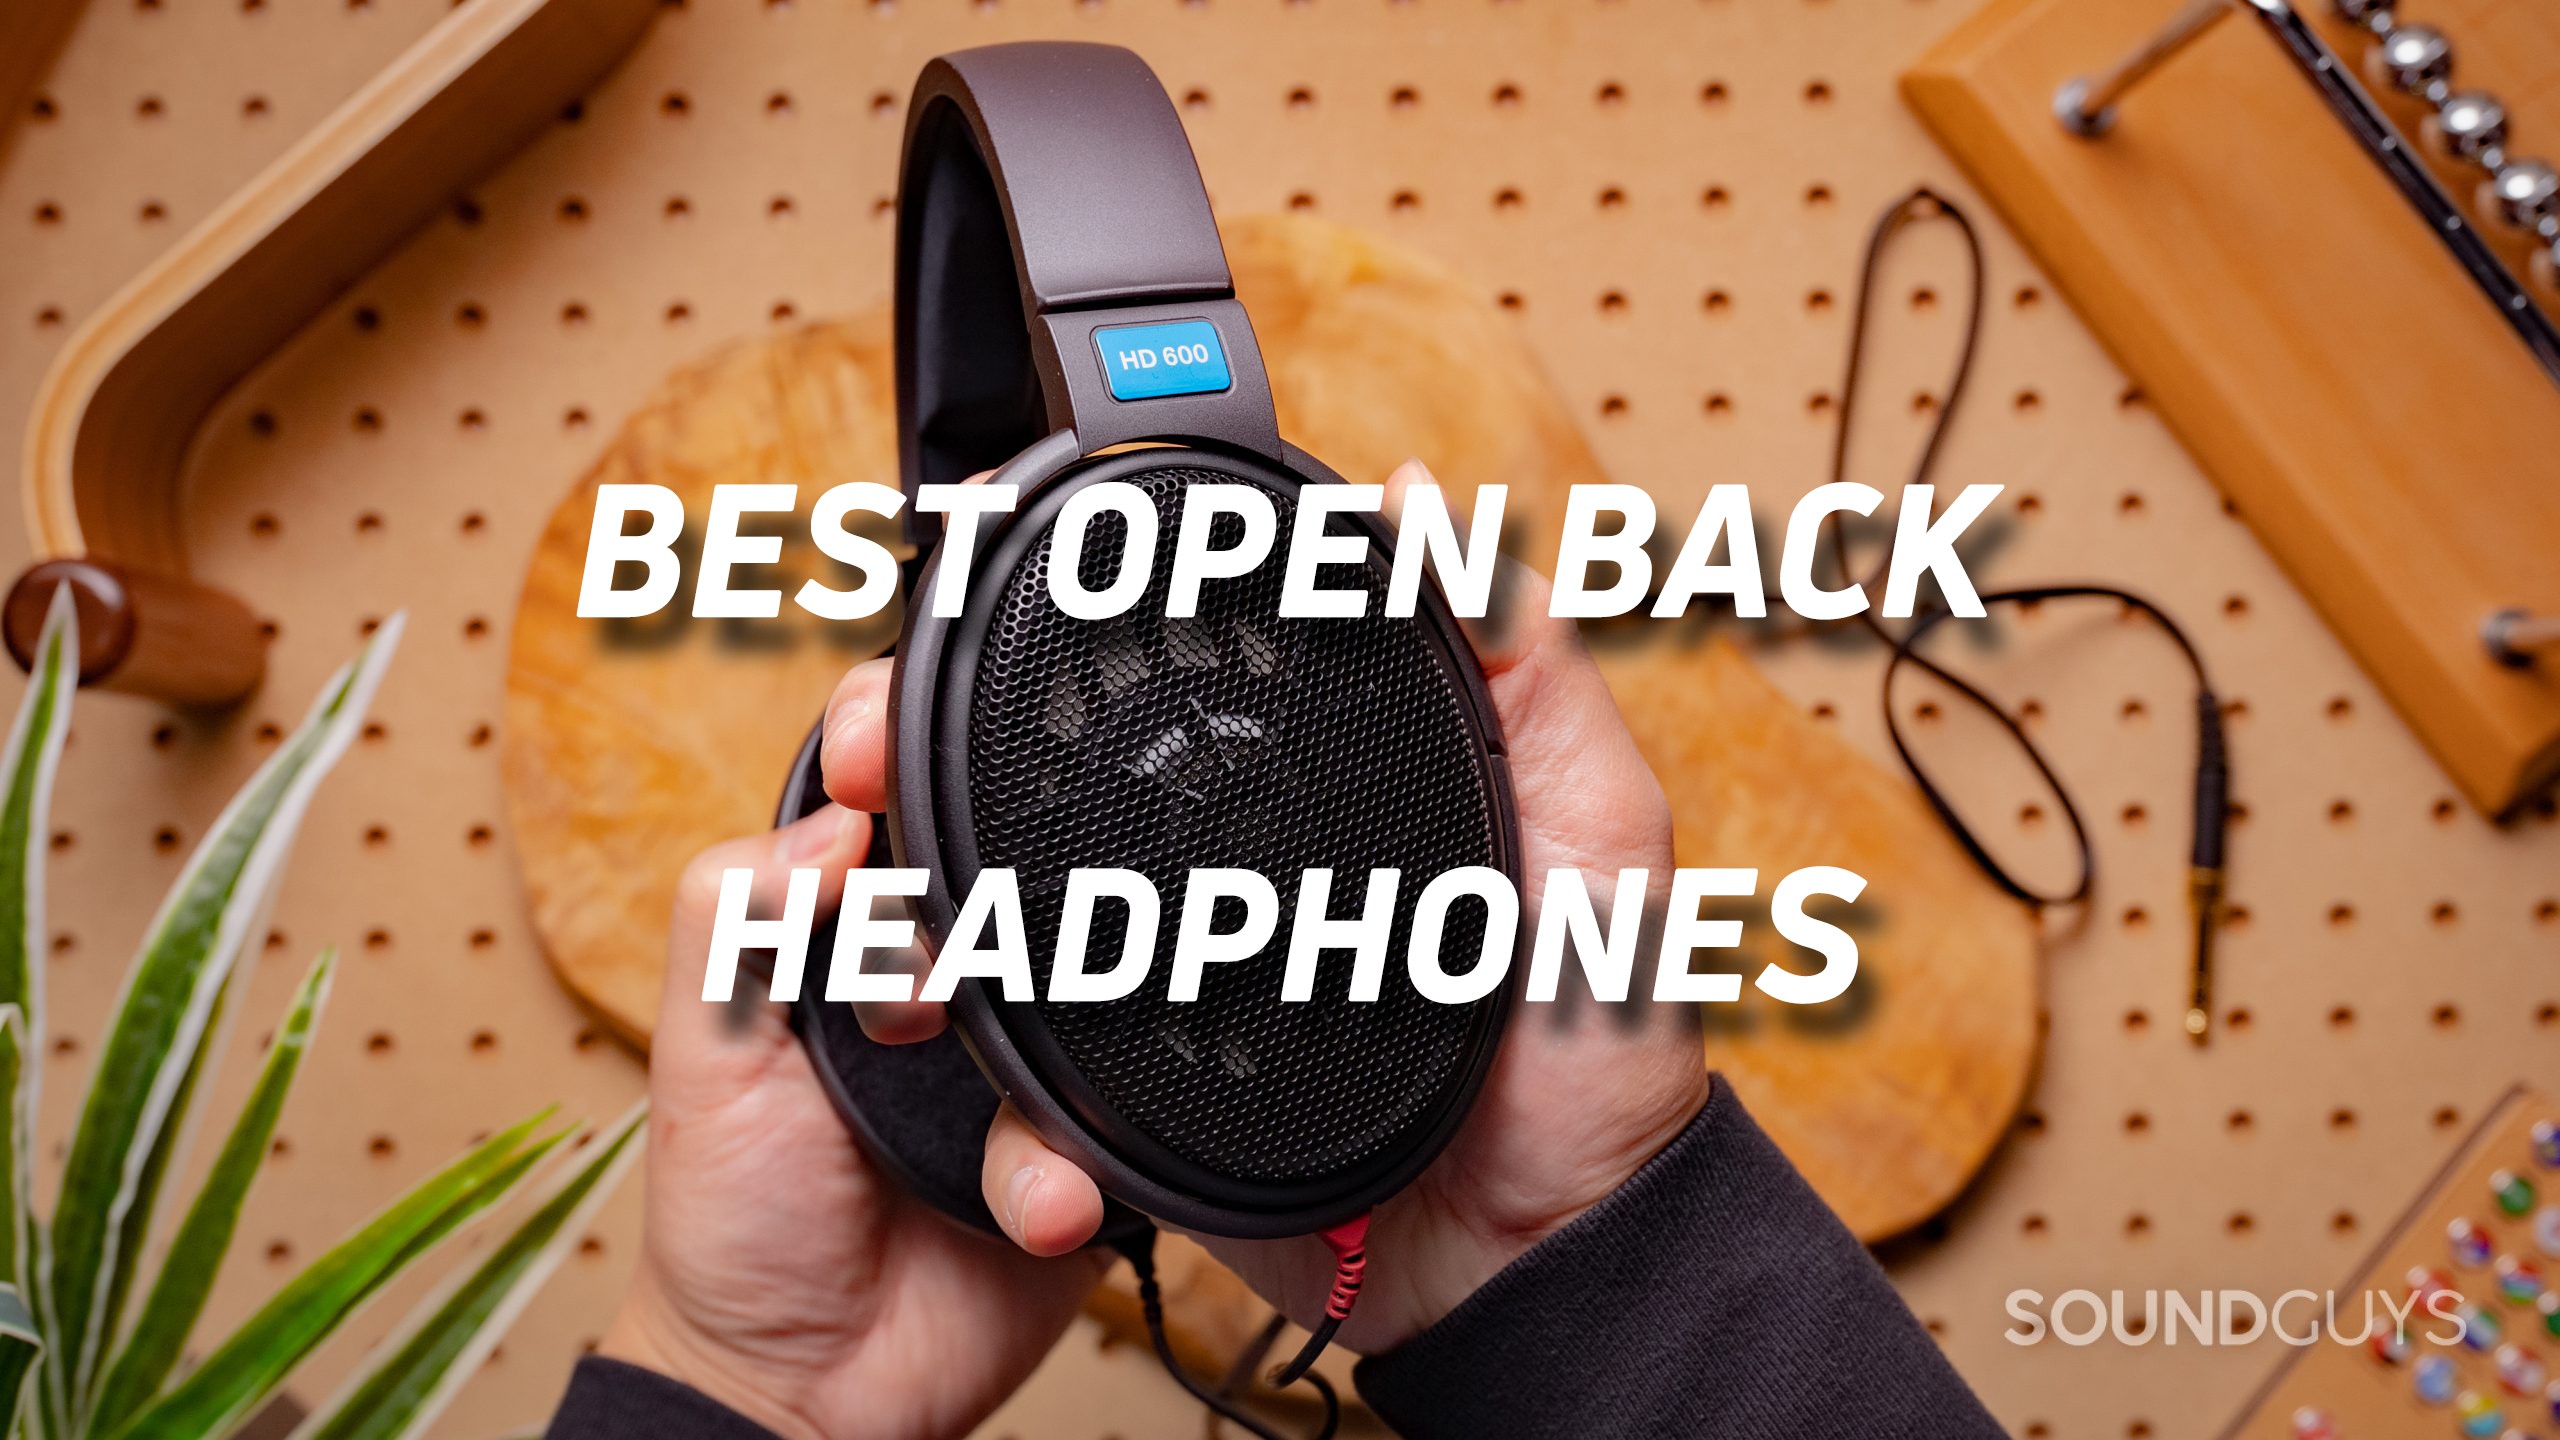 Image showing the mesh Sennheiser HD 600S ear muff with text overlaid.